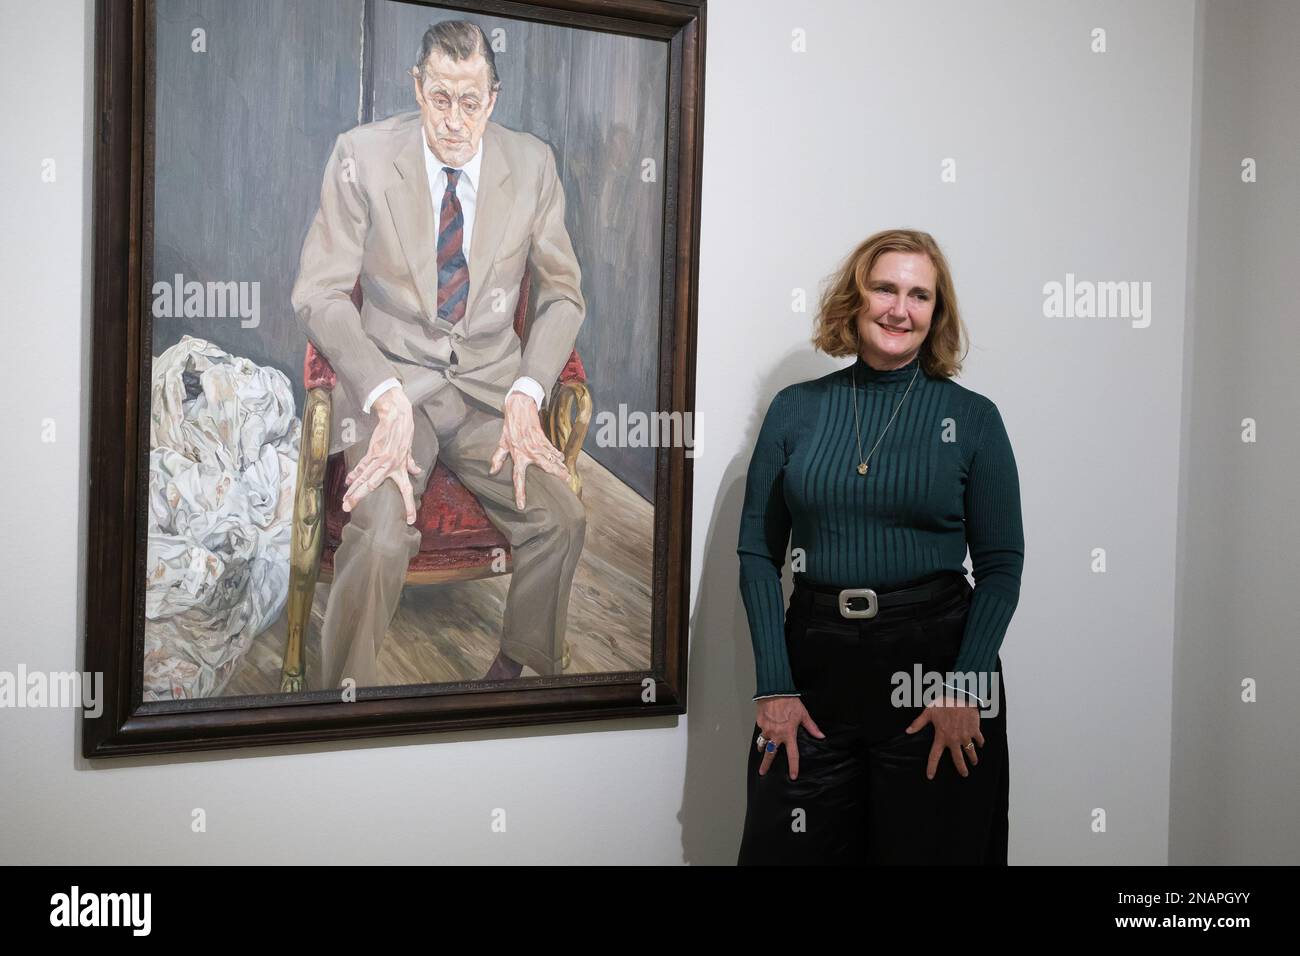 Francesca Thyssen-Bornemisza poses next to the painting 'man in a chair (portrait of Baron Thyssen)' during the presentation of the Lucian Freud exhibition at the Thyssen-Bornemisza museum in Madrid. (Photo by Atilano Garcia / SOPA Images/Sipa USA) Stock Photo